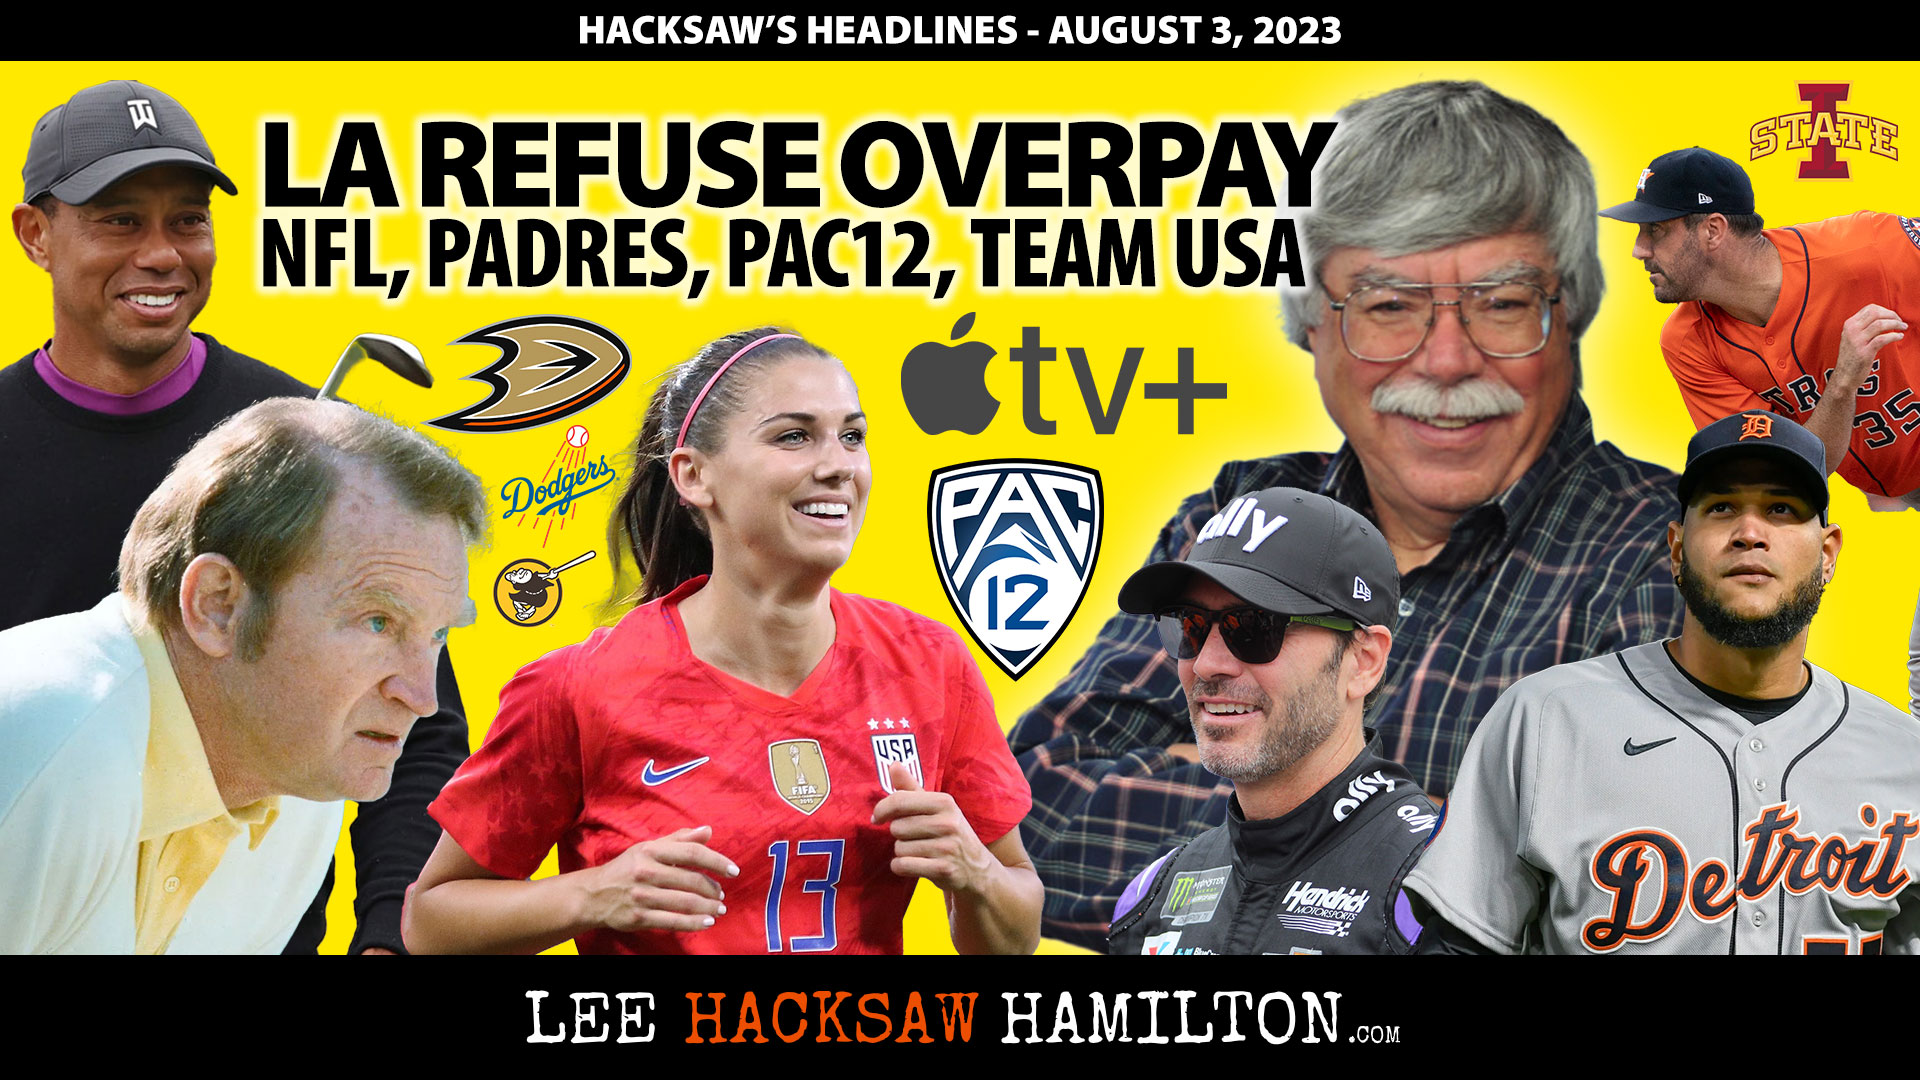 Lee Hacksaw Hamilton discusses Padres/Dodgers/Angels Trade Deadline Day, NFL Hall of Fame, PAC12 update, Team USA, Ducks, NASCAR